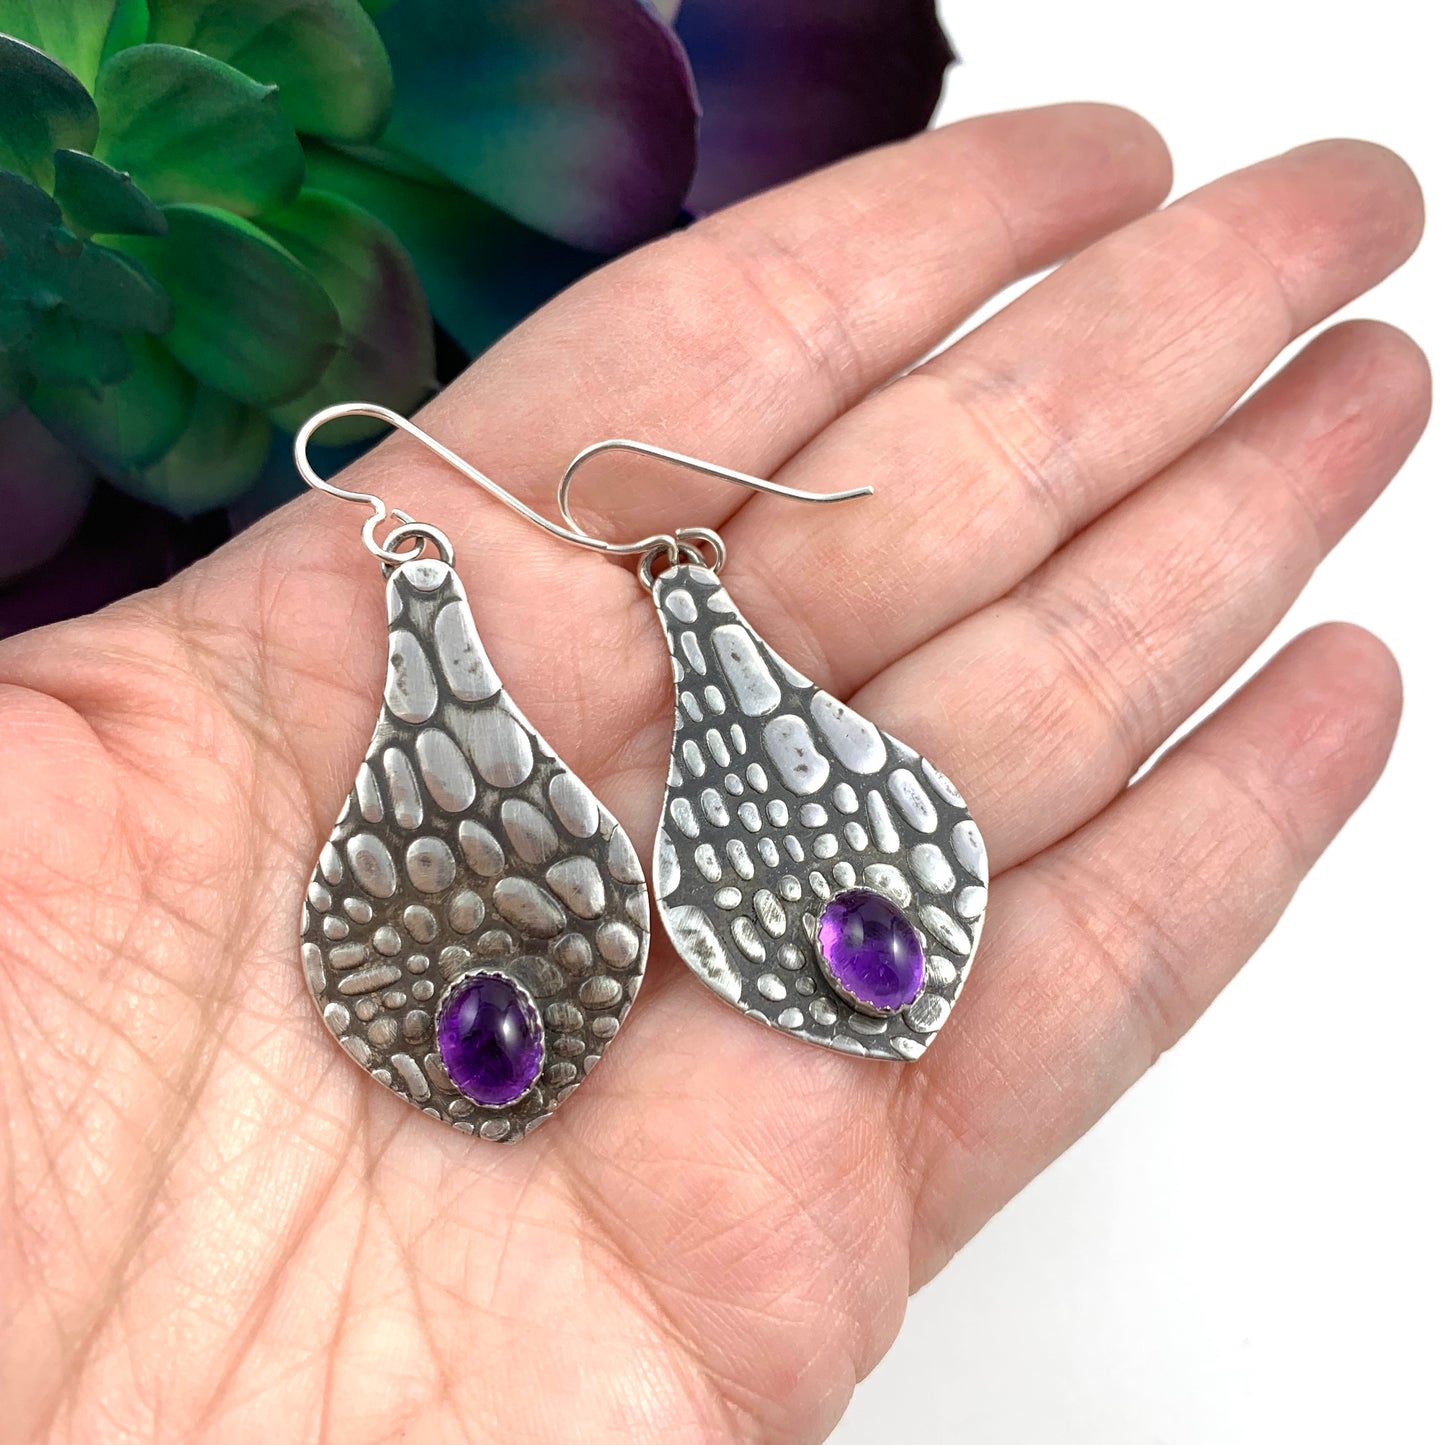 Mandana Studios sterling silver textured with a crocodile pattern and accented with gorgeous Amethyst stones